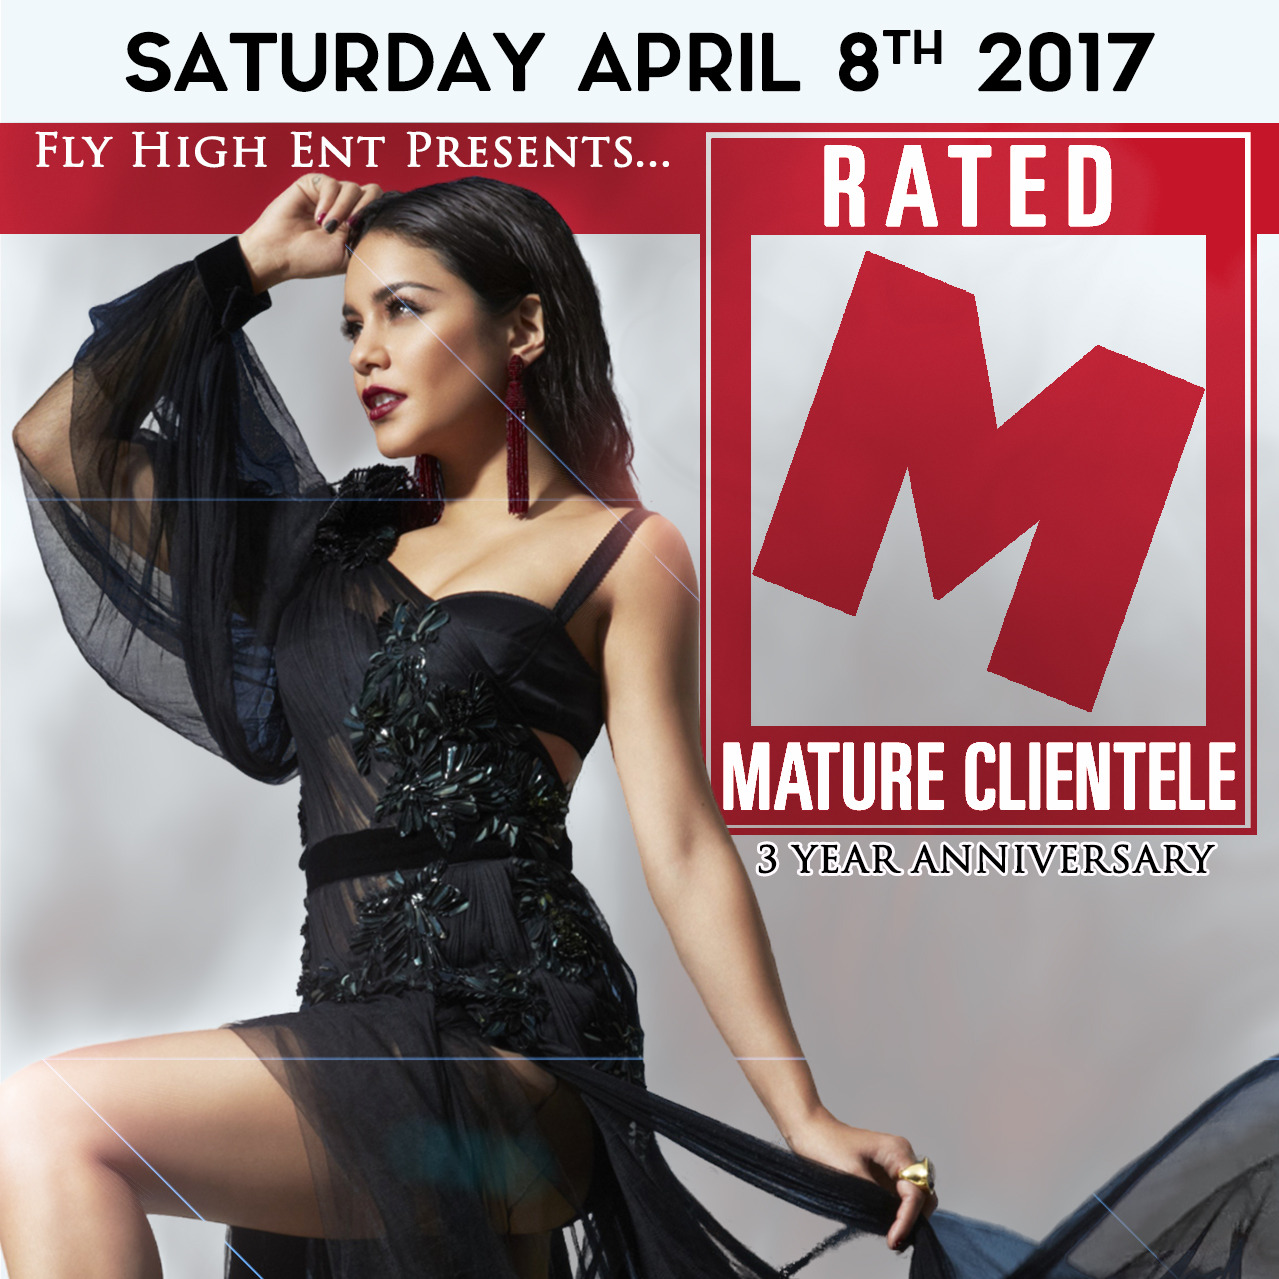 **** Rated M: Mature Clientele ~ 3 Year Anniversary ****